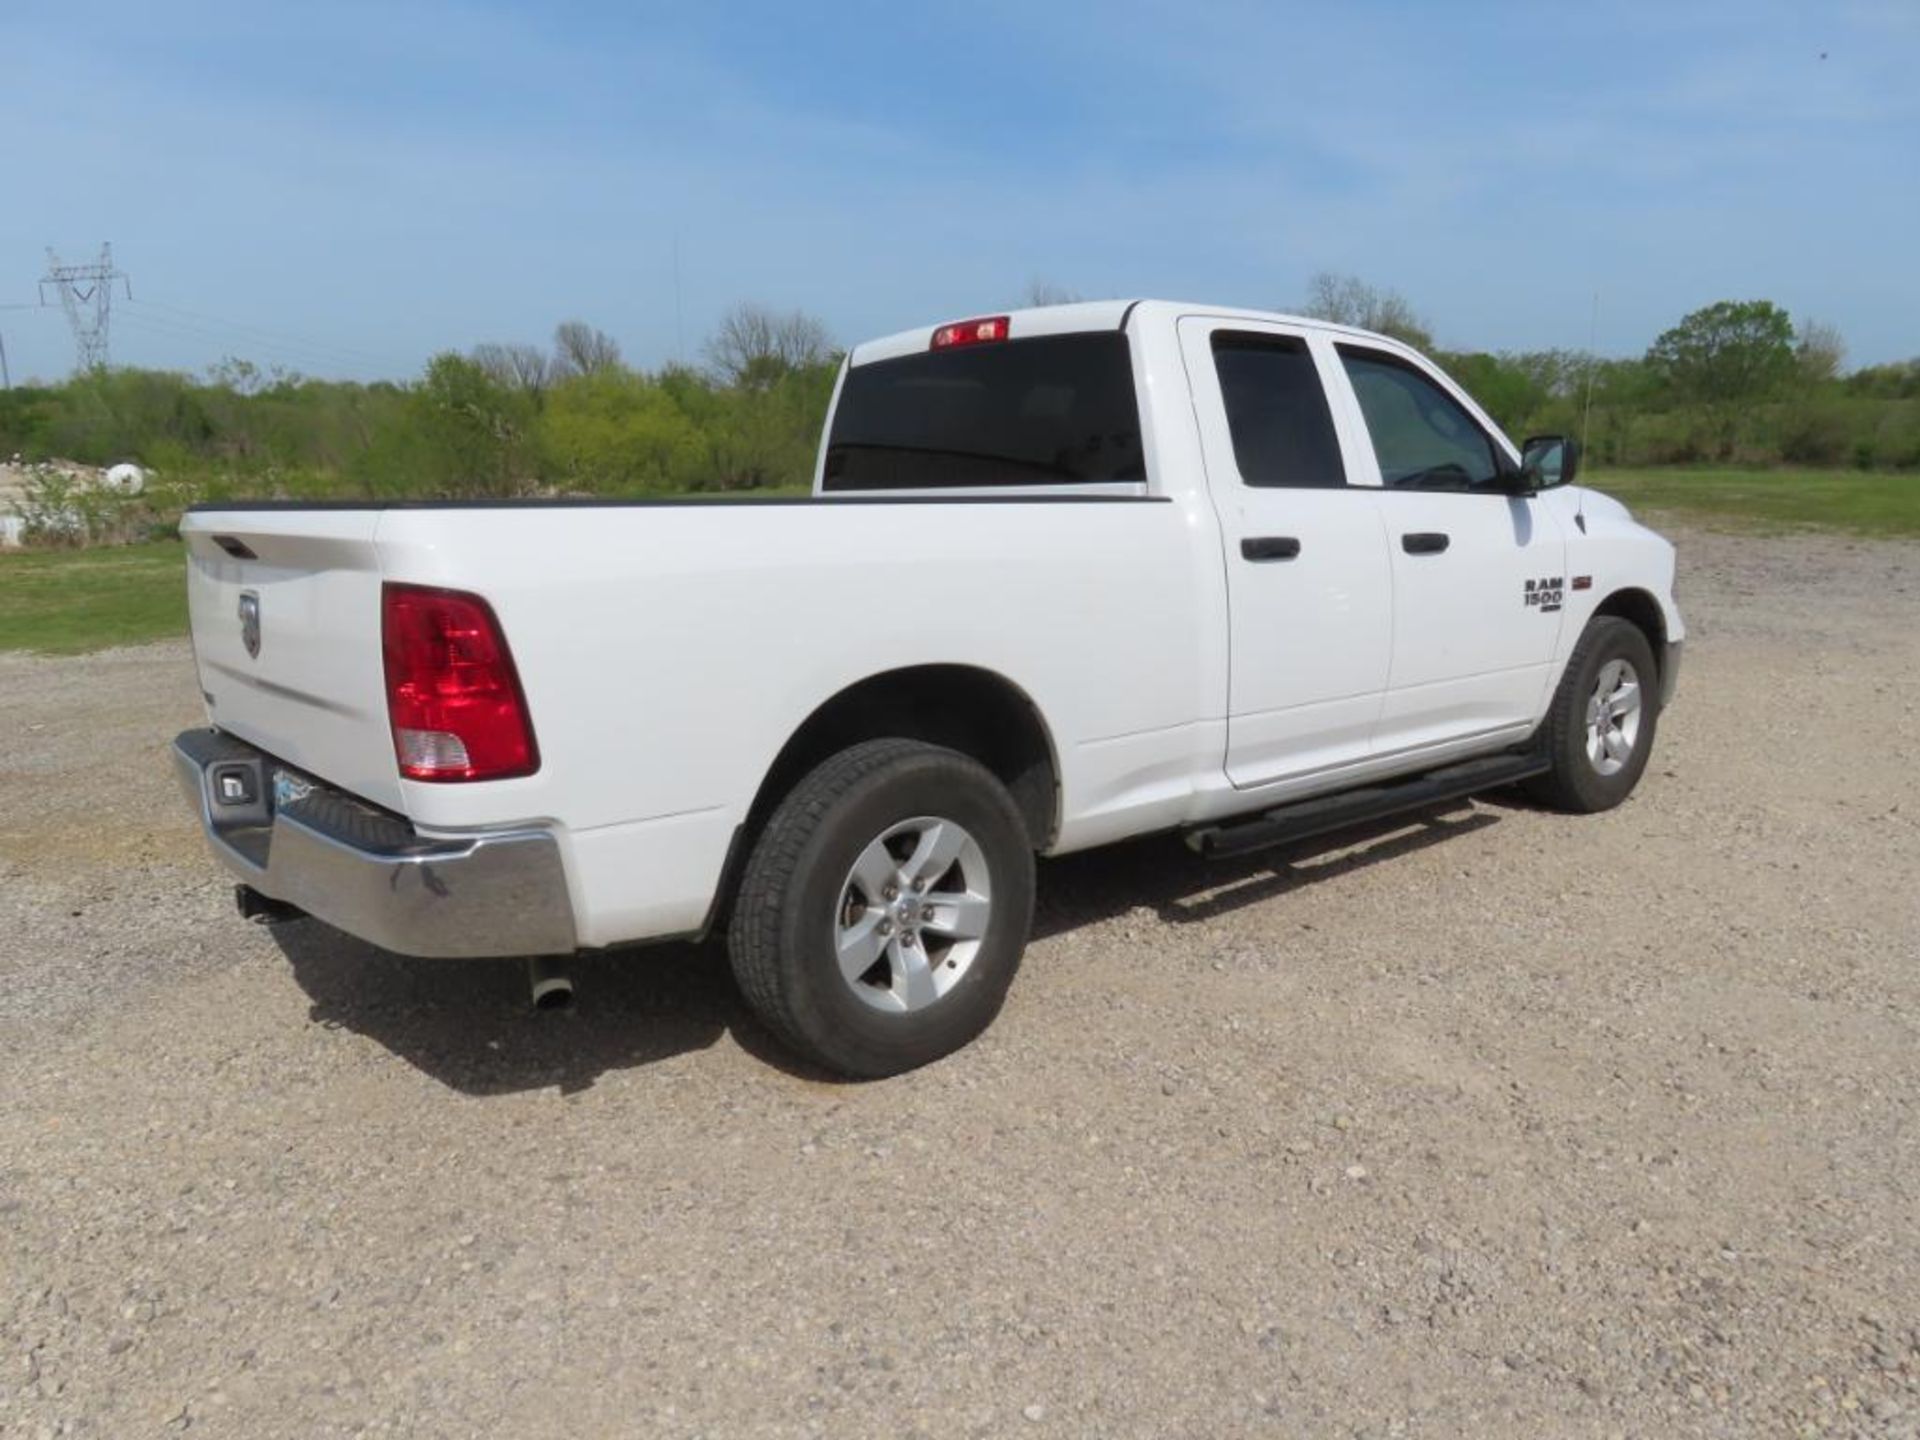 2019 RAM 1500 CLASSIC EXT. CAB PICKUP, VIN# 1C6RR6FT6KS723075, APPROX. 24,400 MILES, STD. BED, SPRAY - Image 4 of 9